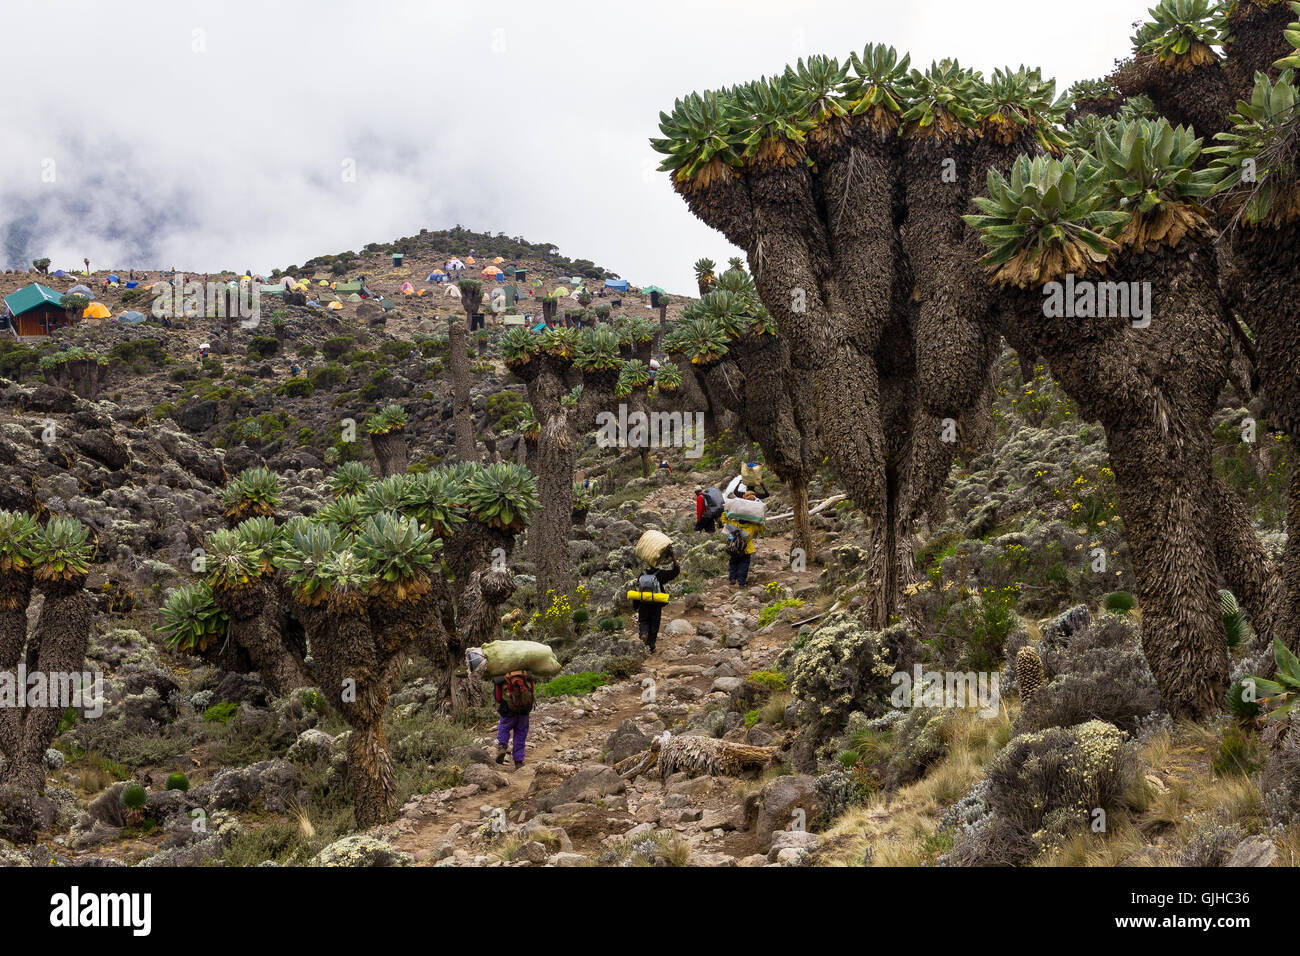 Guides and porters Approaching Barranco Camp on Mount Kilimanjaro, Tanzania Stock Photo